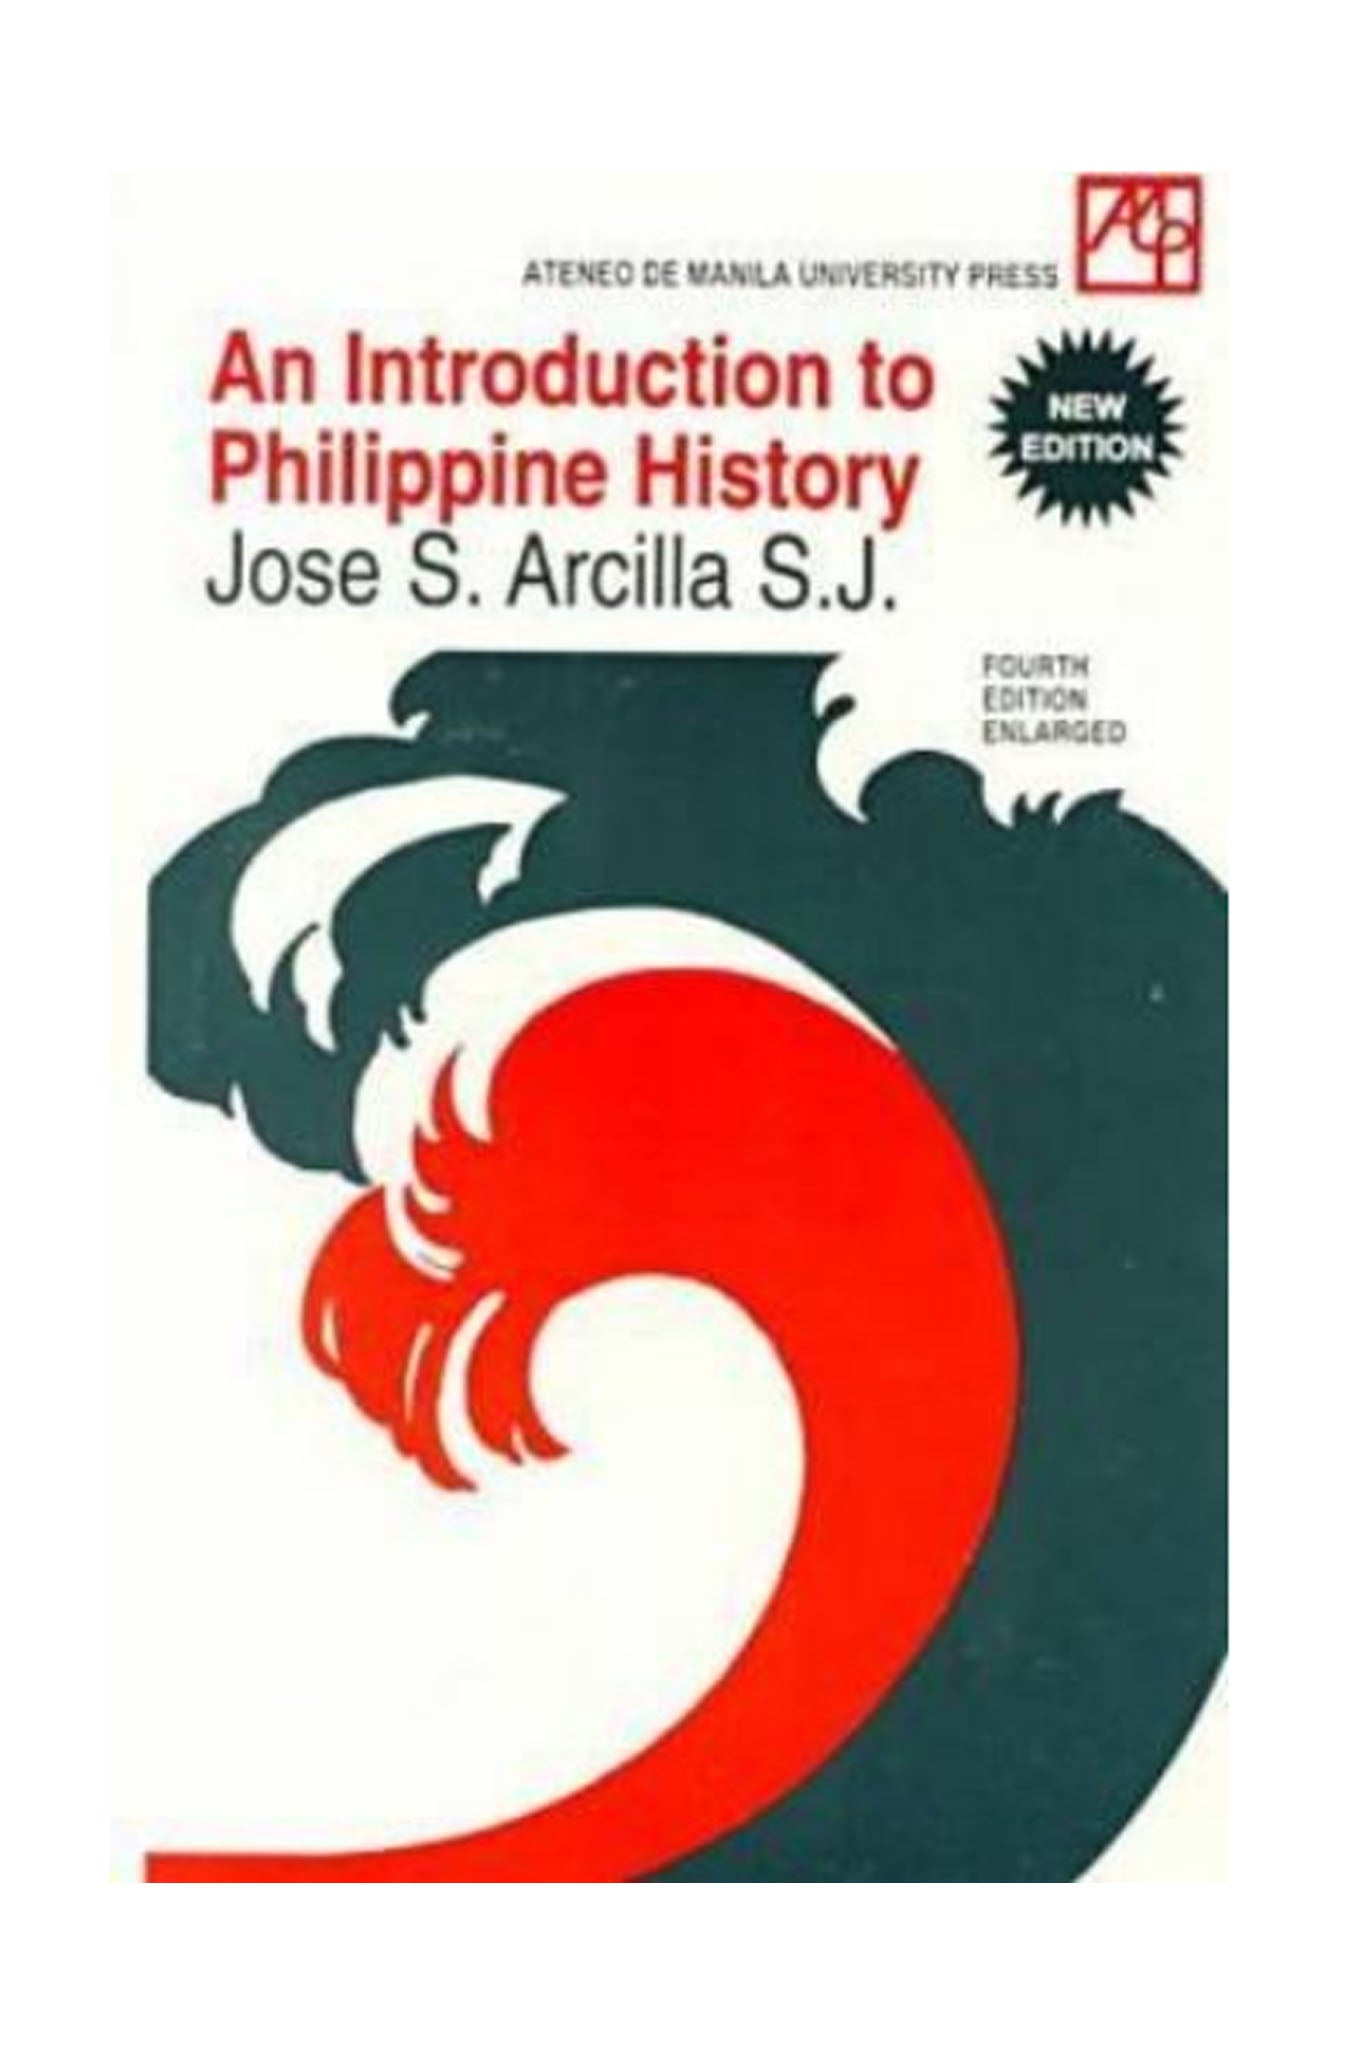 BARONG WAREHOUSE - FB03 - An Introduction to Philippine History | by: Jose S. Arcilla S.J. - Filipino History Book